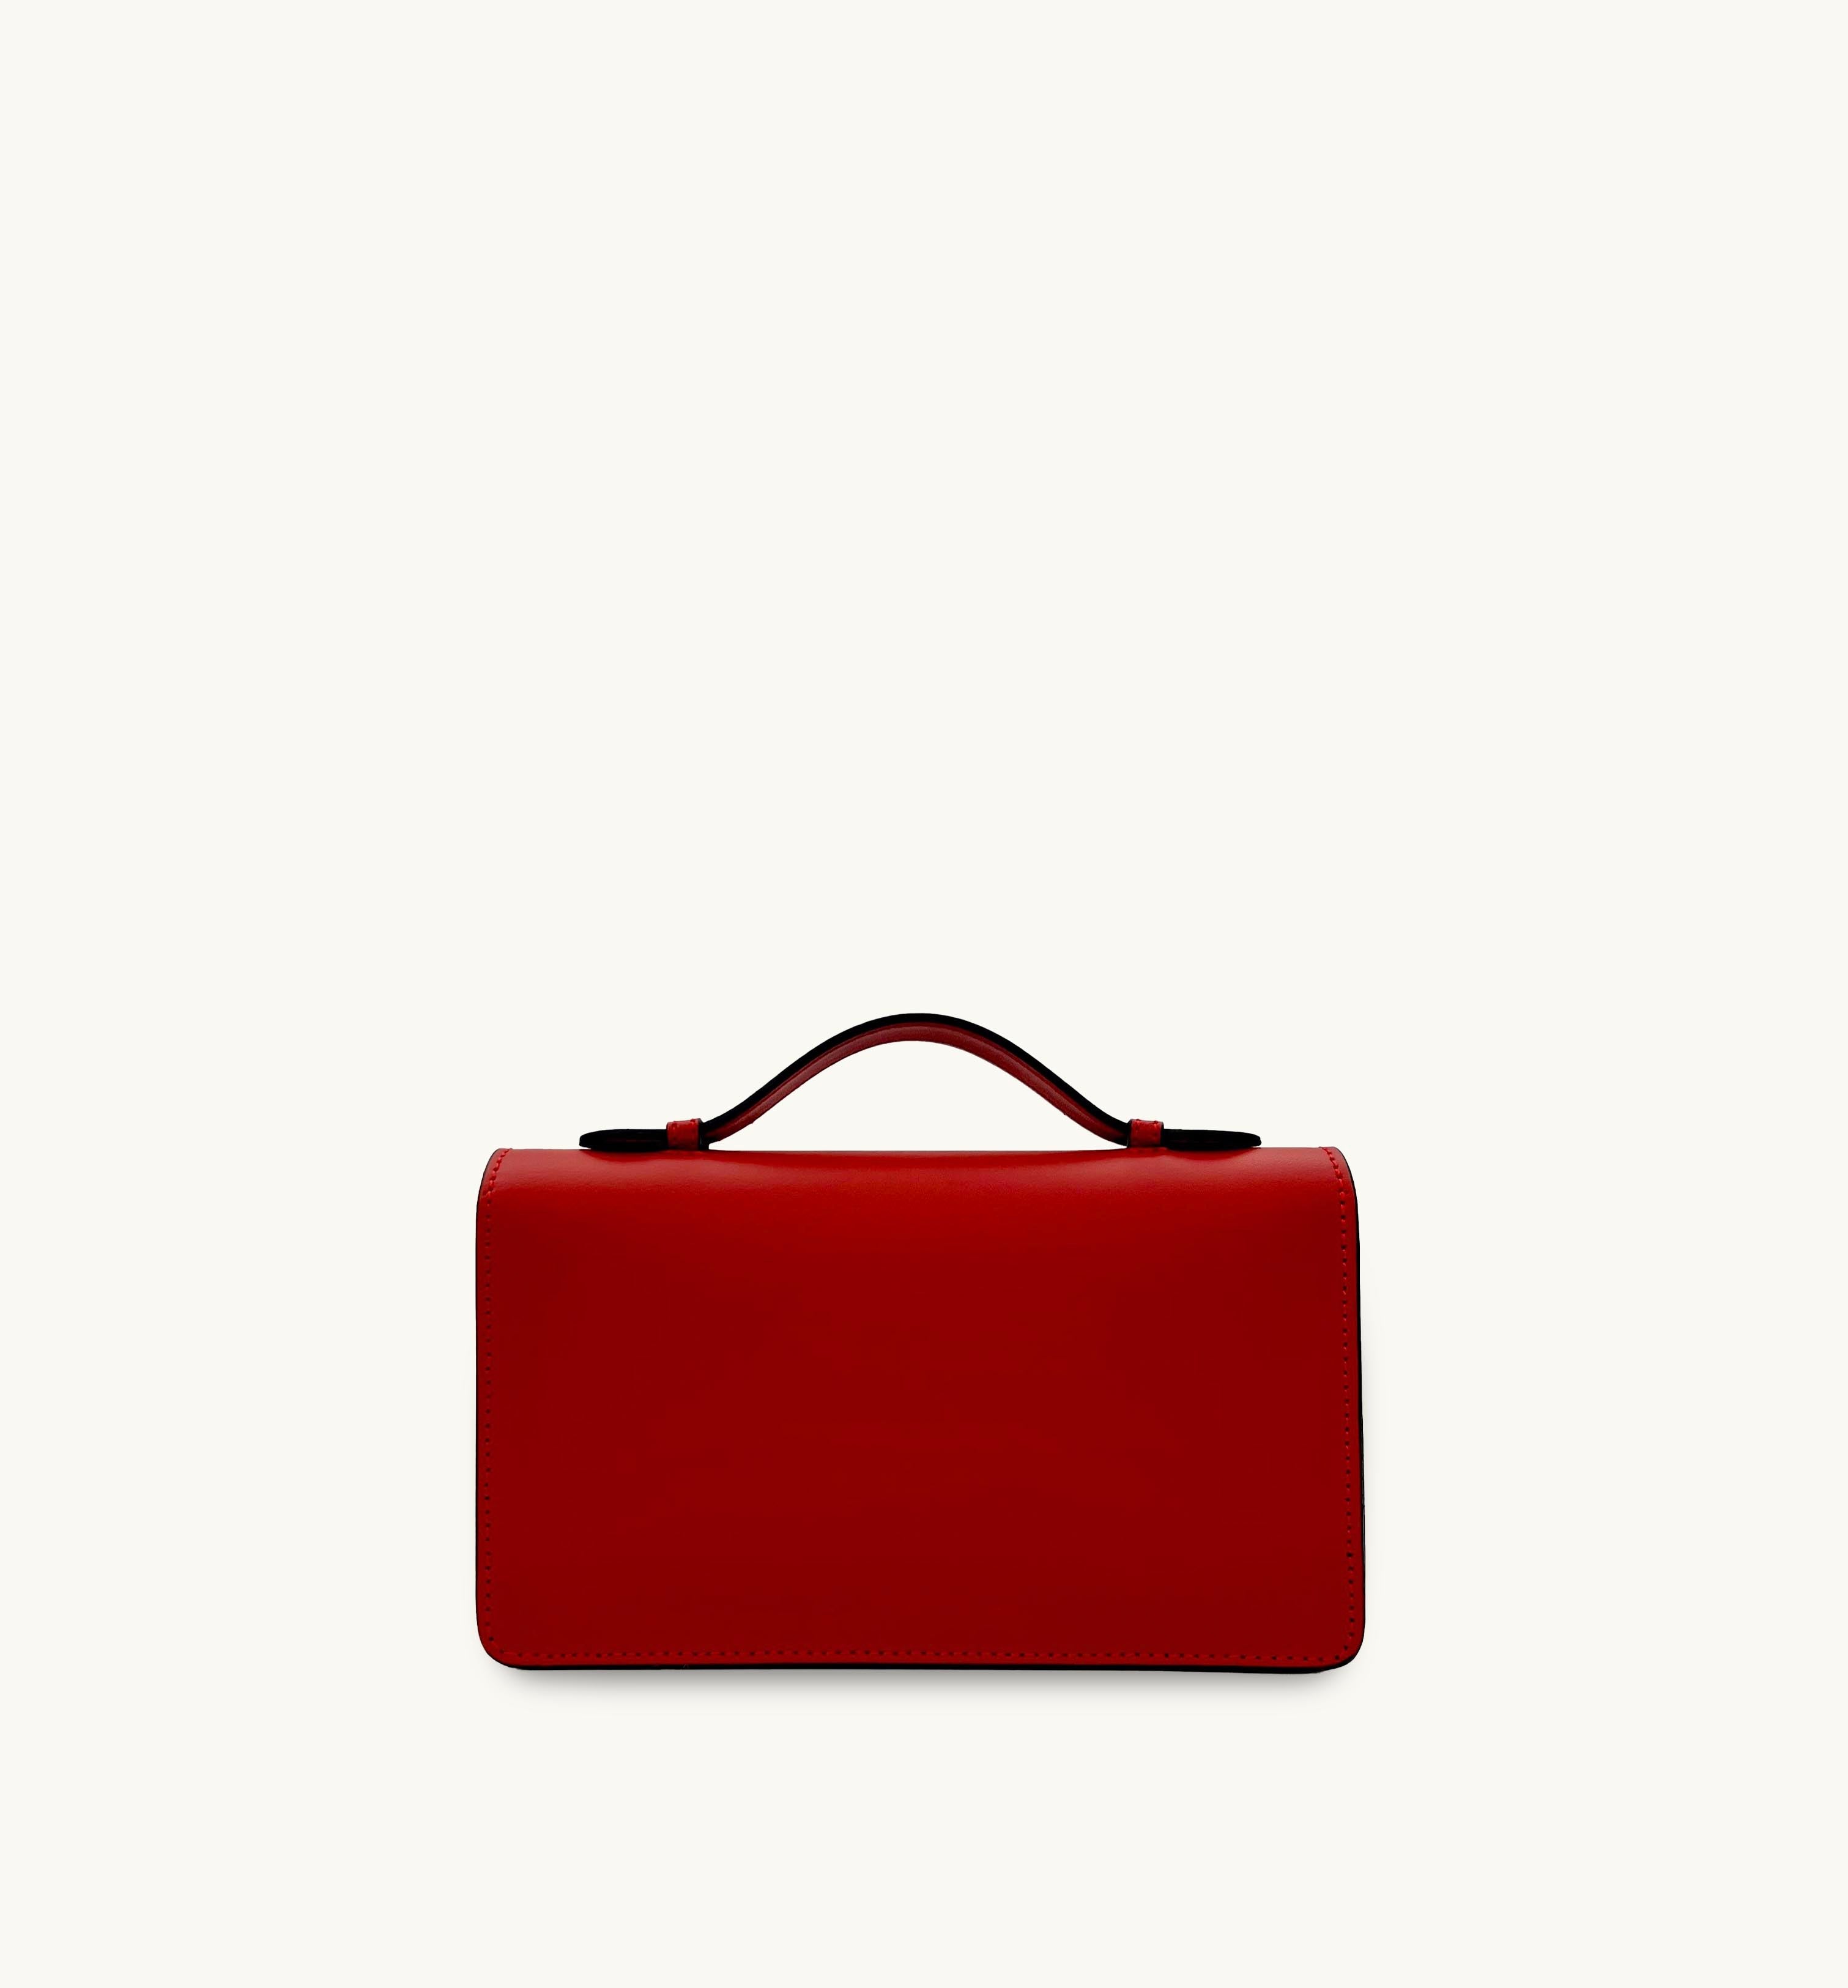 The Amelia Chilli Red Leather Bag